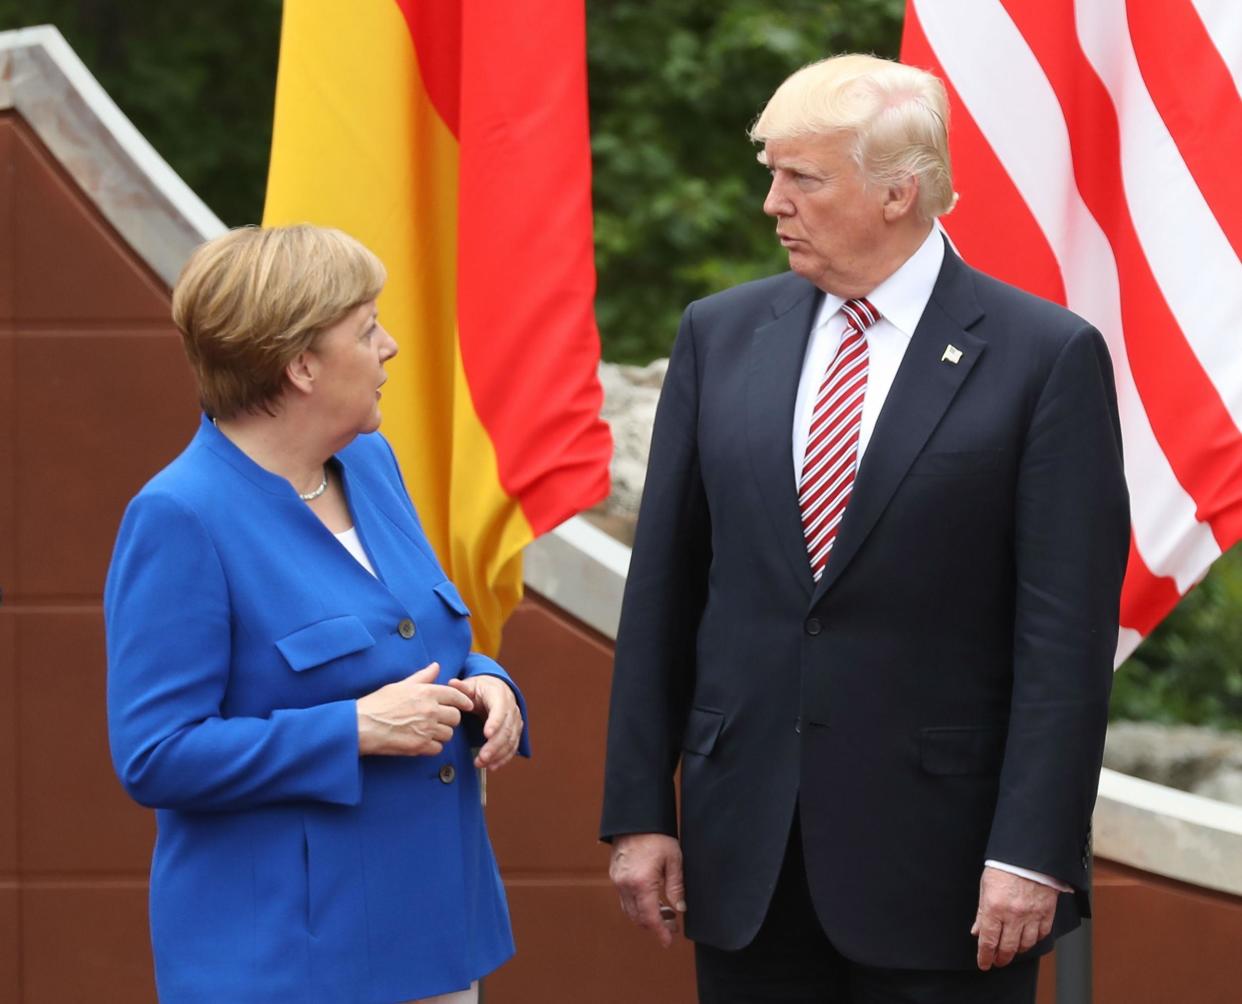 The two leaders disagreed strongly on several issues - particularly climate change: Getty